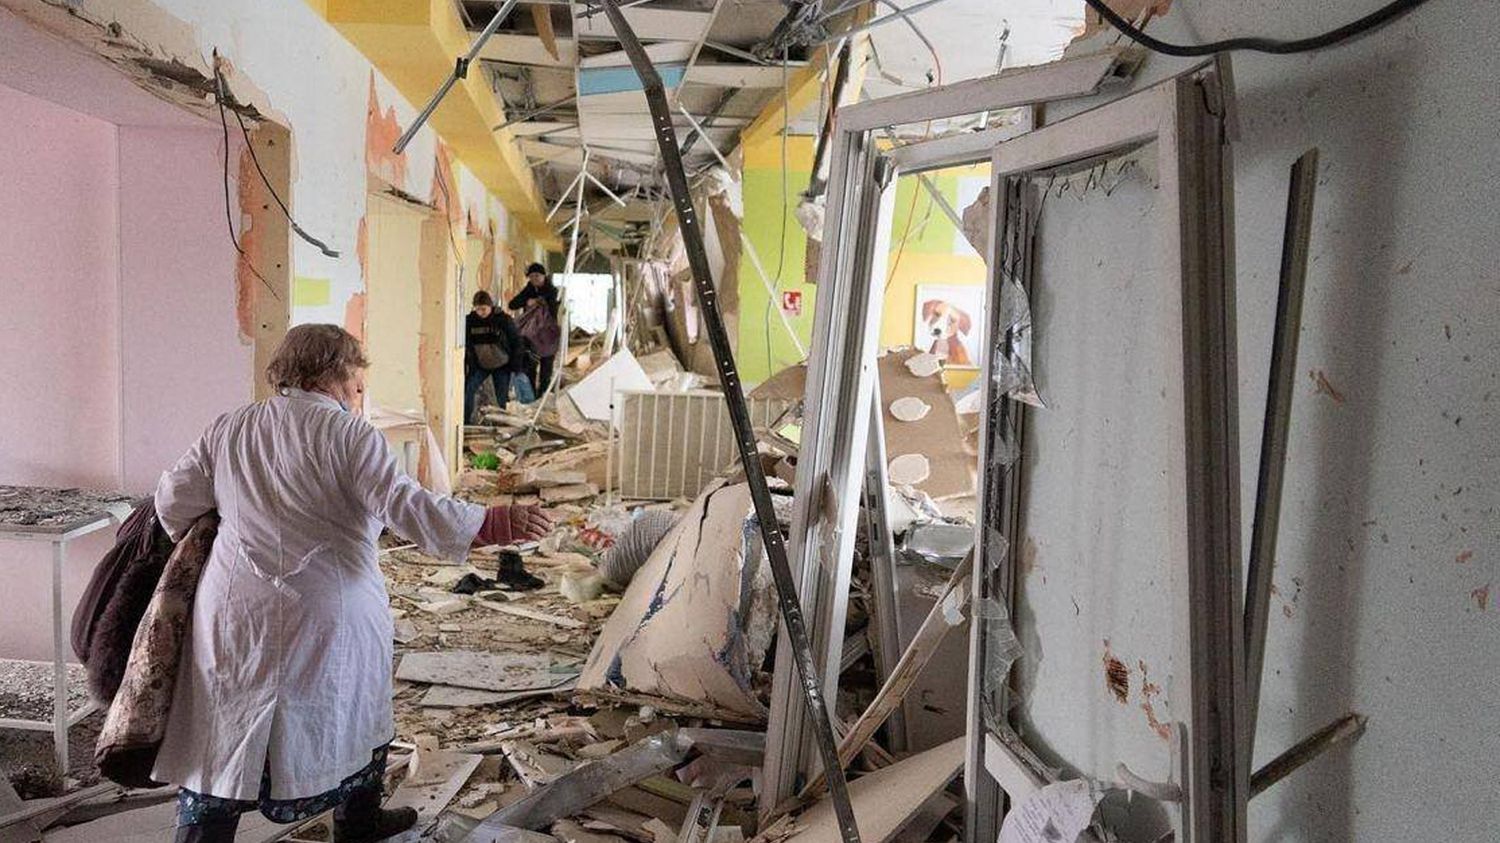 War in Ukraine: after the bombing of a pediatric hospital, convictions multiply
